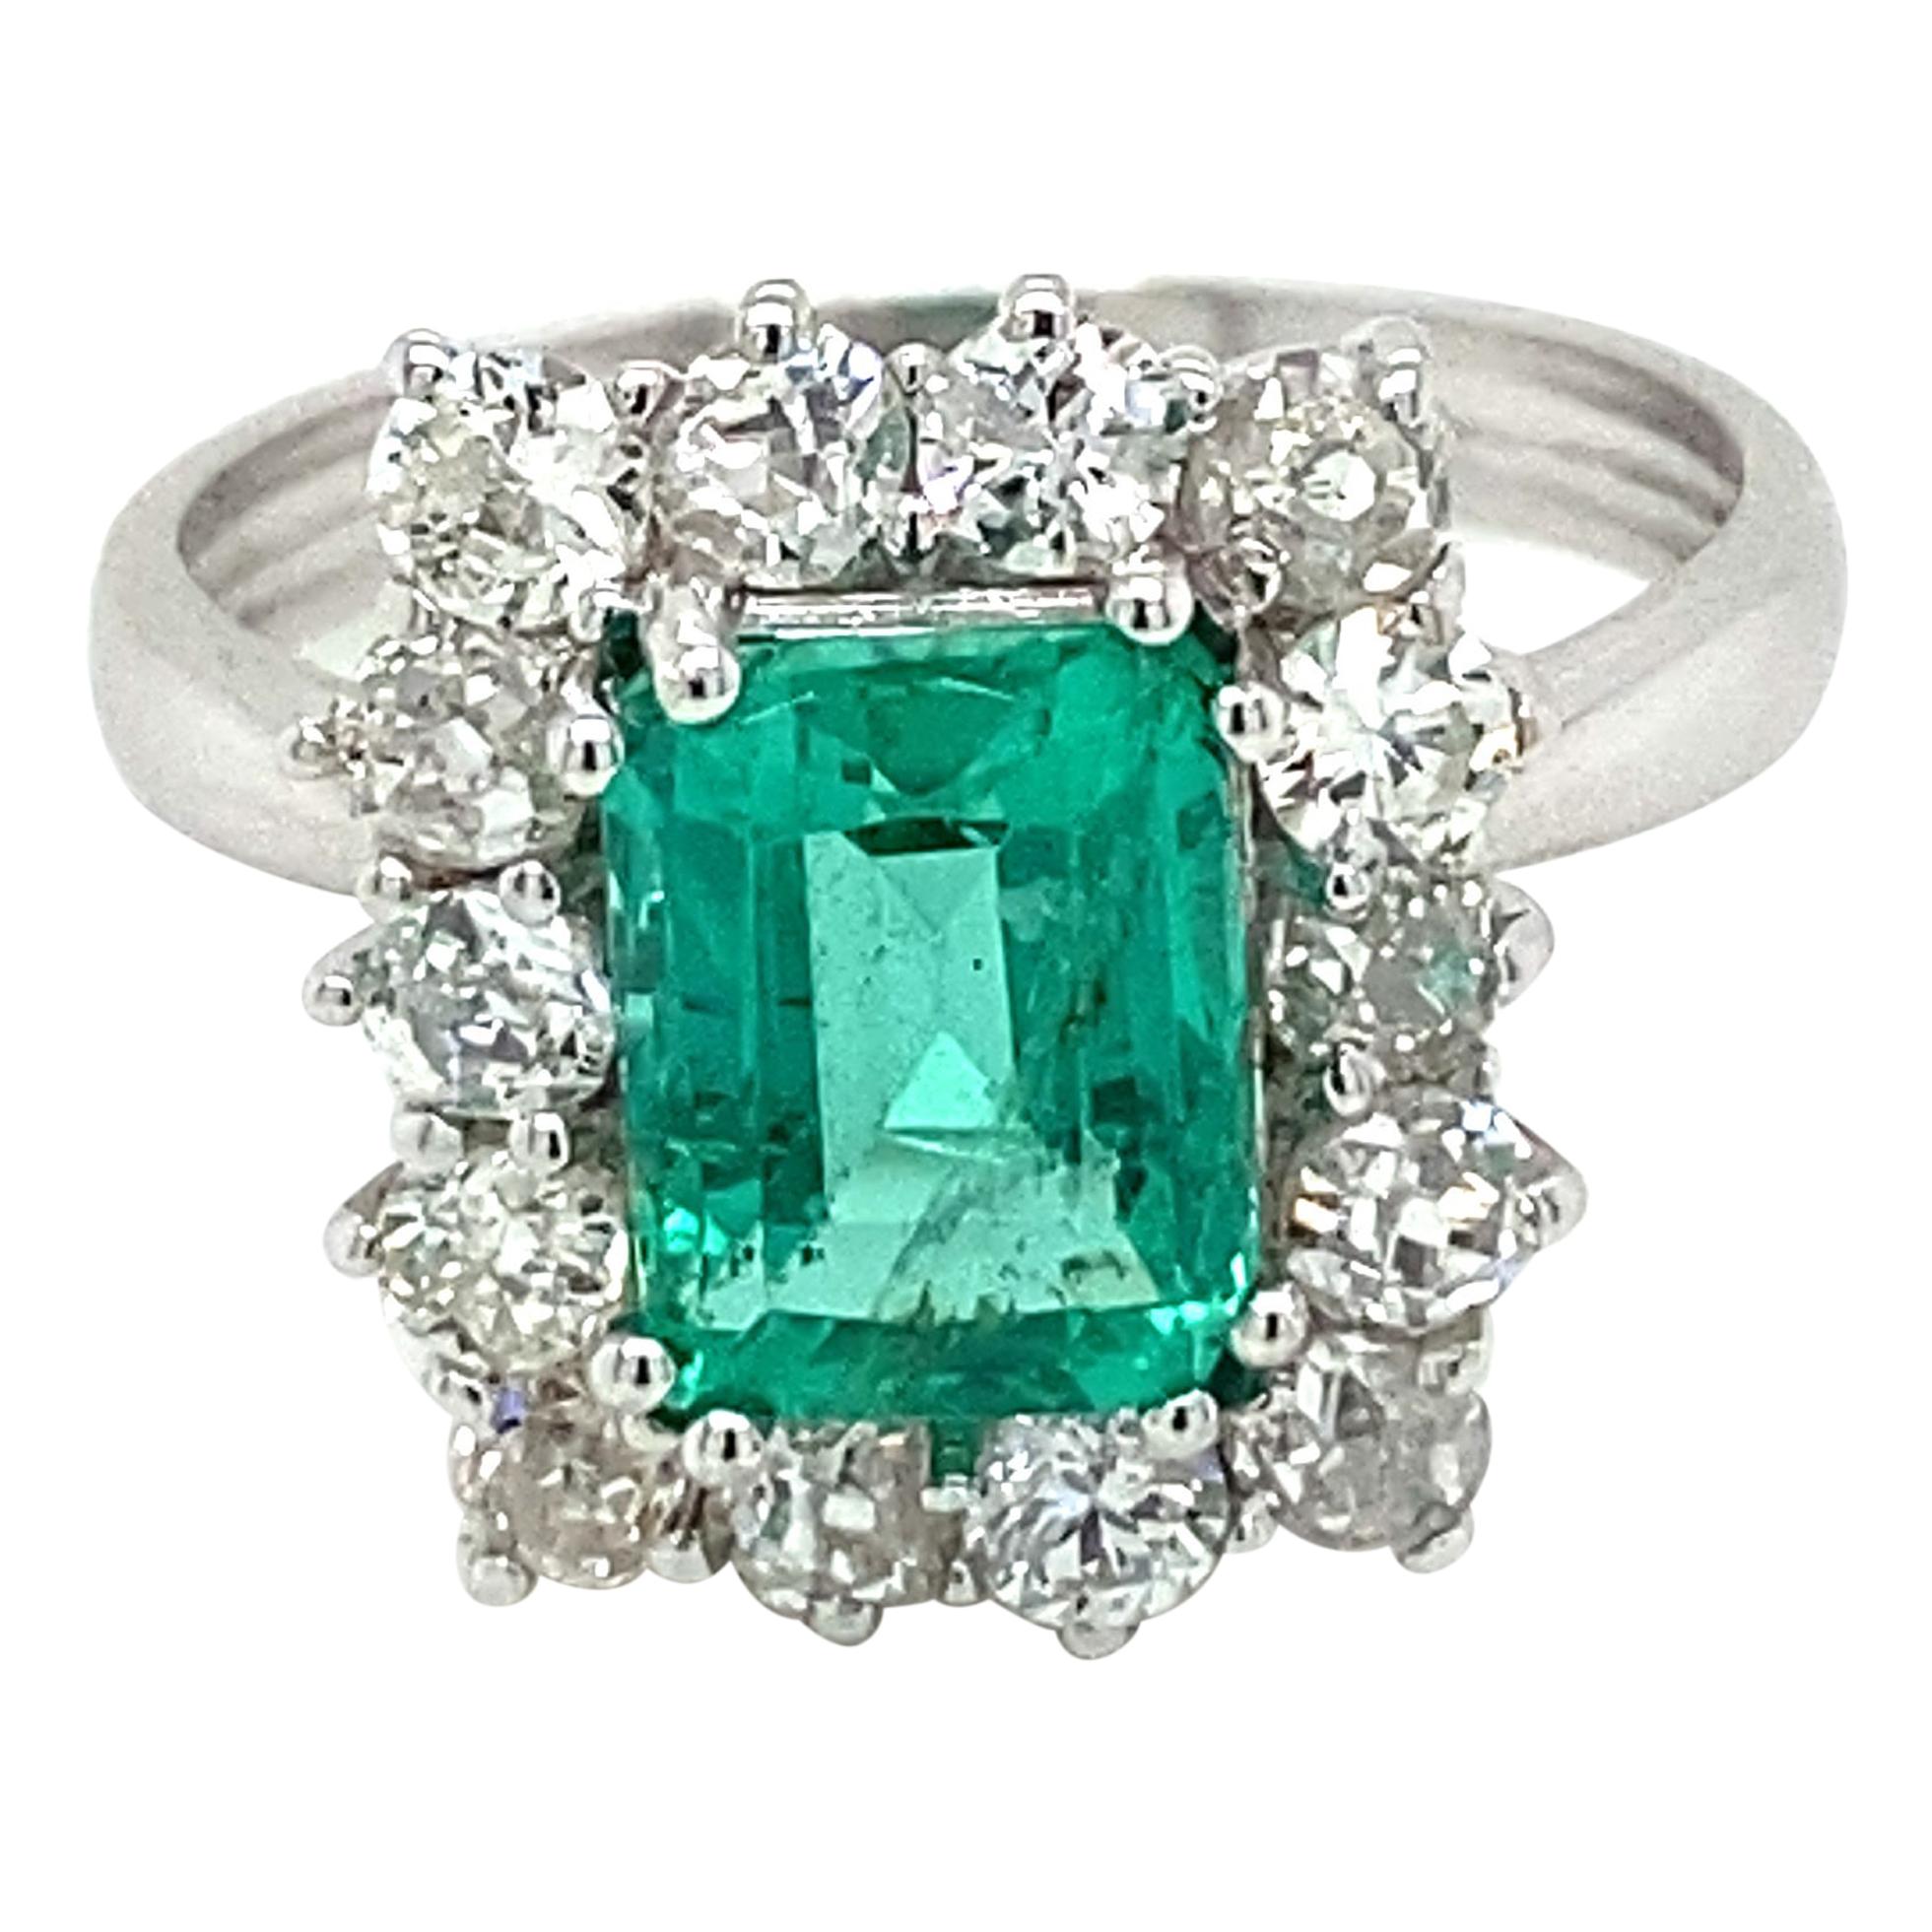 A beautiful and classy 18k white Gold engagement ring showcasing a natural Vivid Colombian Emerald 1,78 carats of great quality, surrounded by 15 Sparkling Round brilliant cut diamonds, total weight 1.30 carats, graded G/H color Vs2.
Origin Italy,